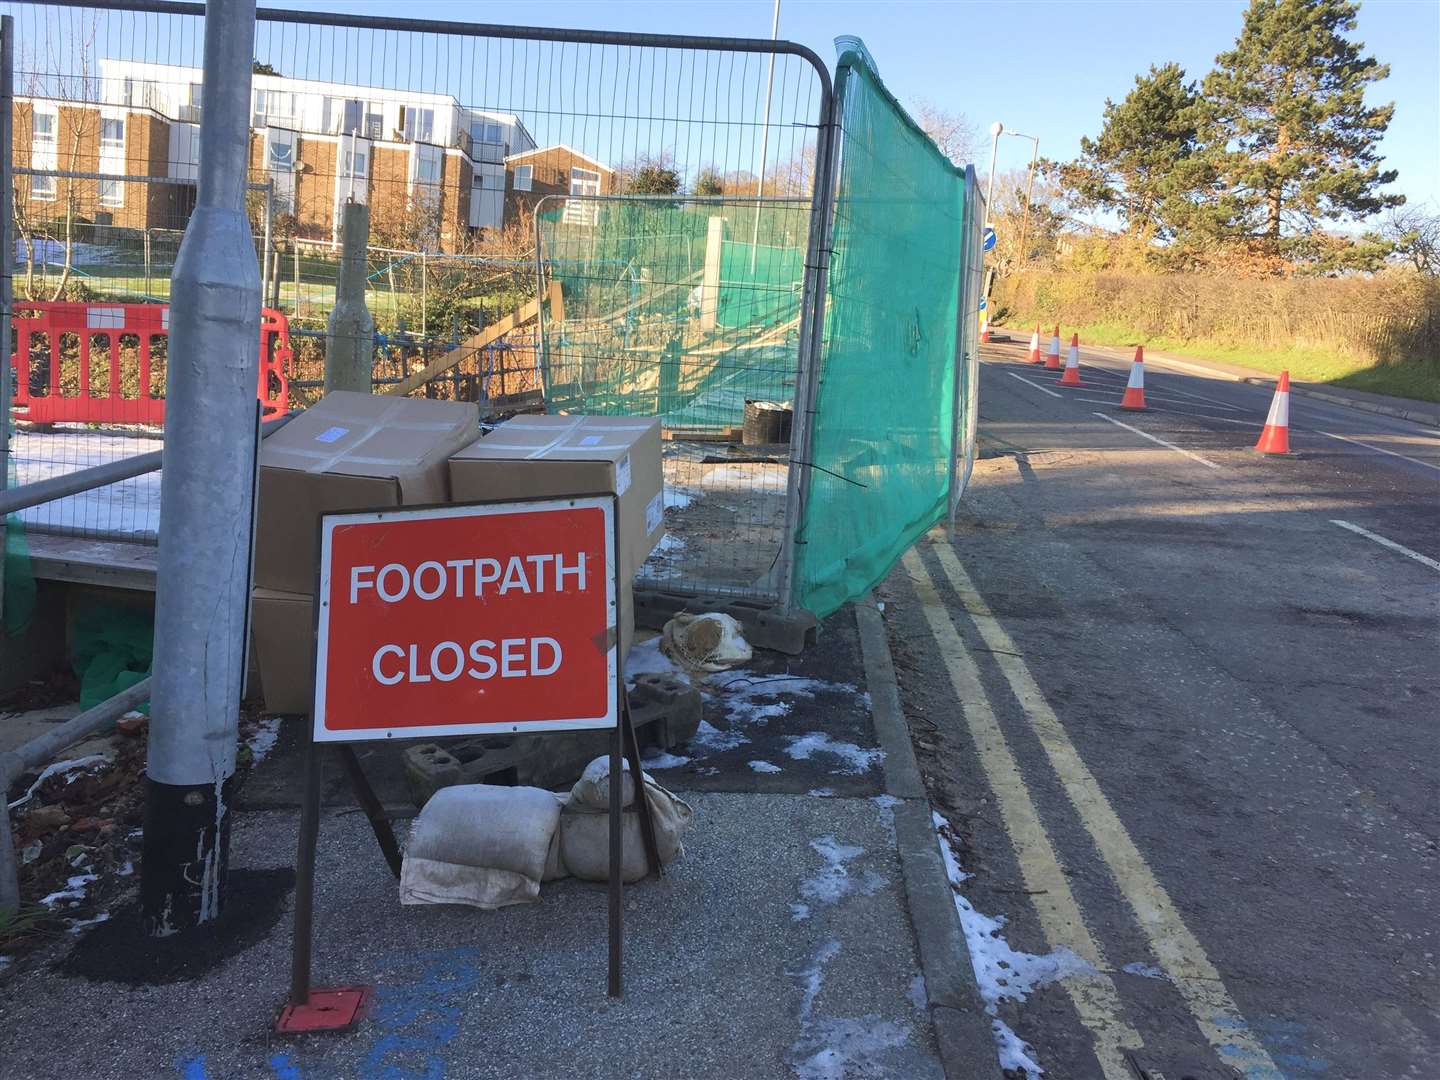 The footpath has been closed off while the work takes place